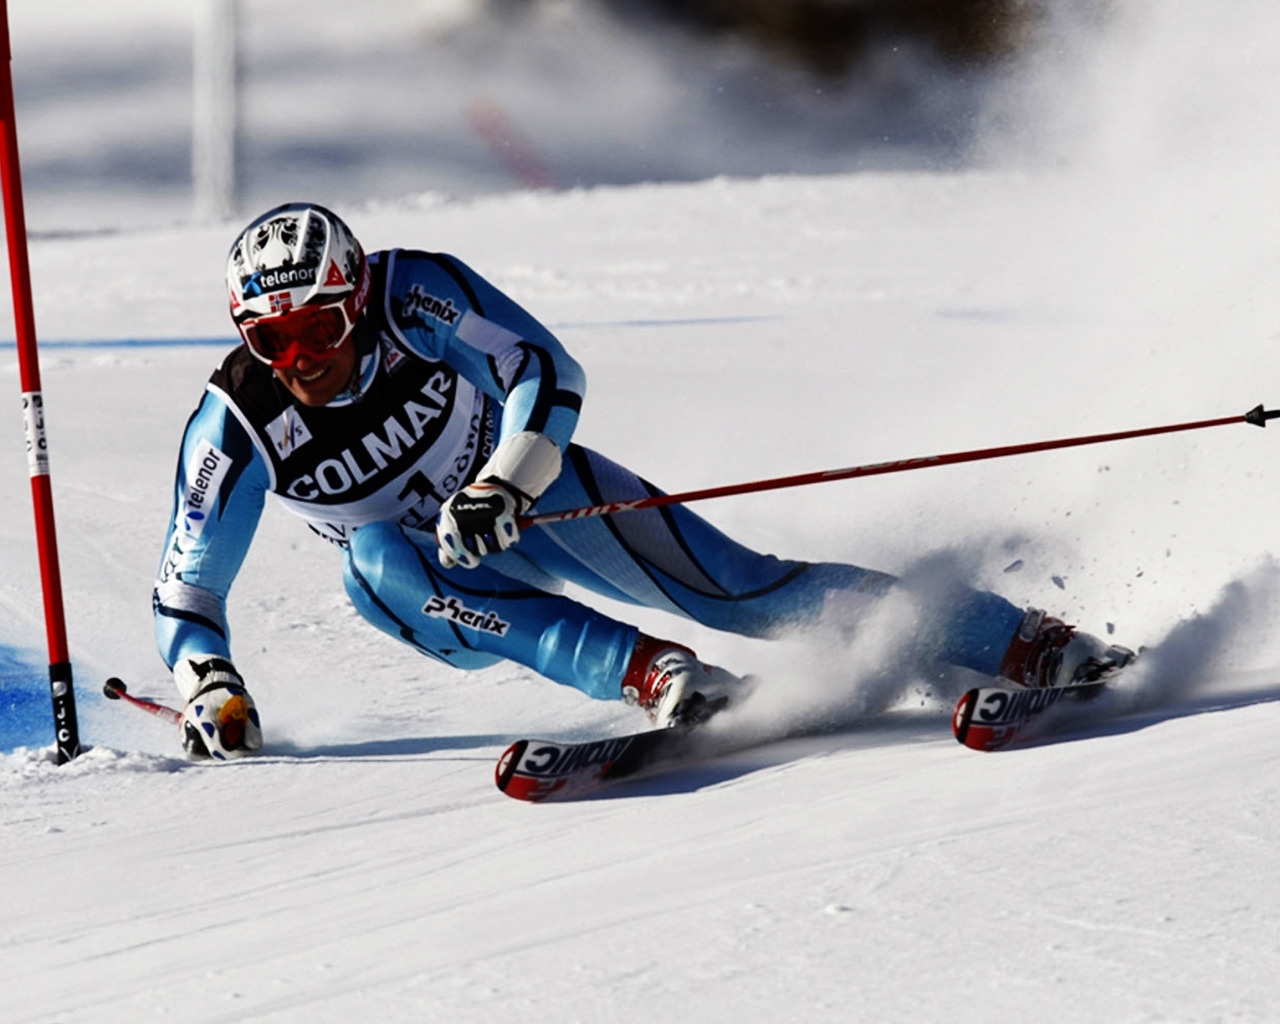 Aksel Lund Svindal for 1280 x 1024 resolution